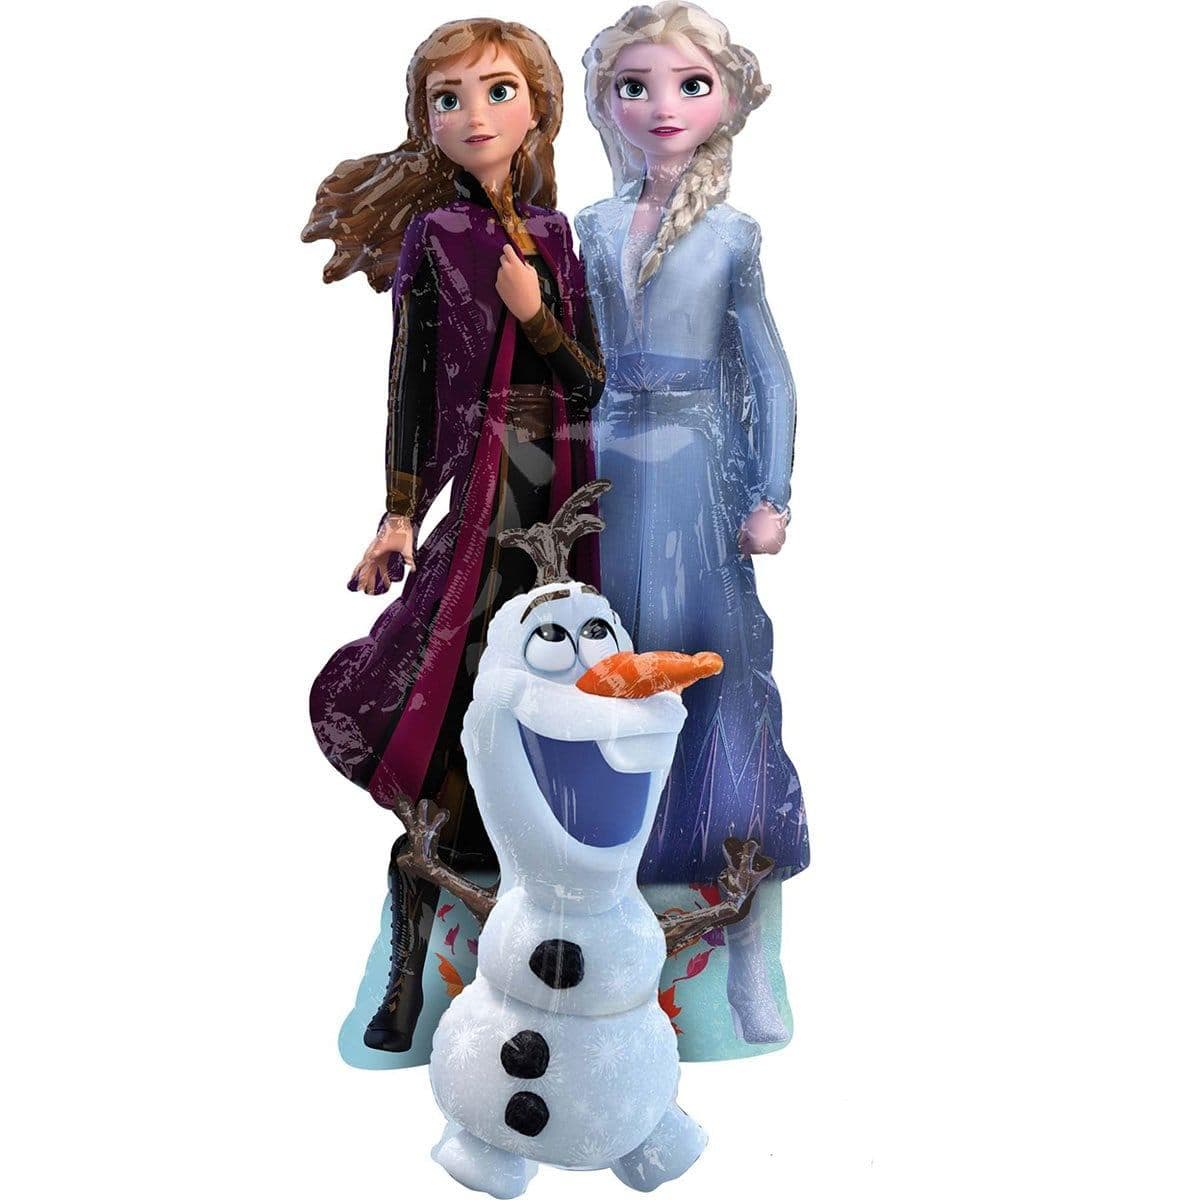 Buy Balloons Giant Frozen 2 Air Walker Balloon sold at Party Expert